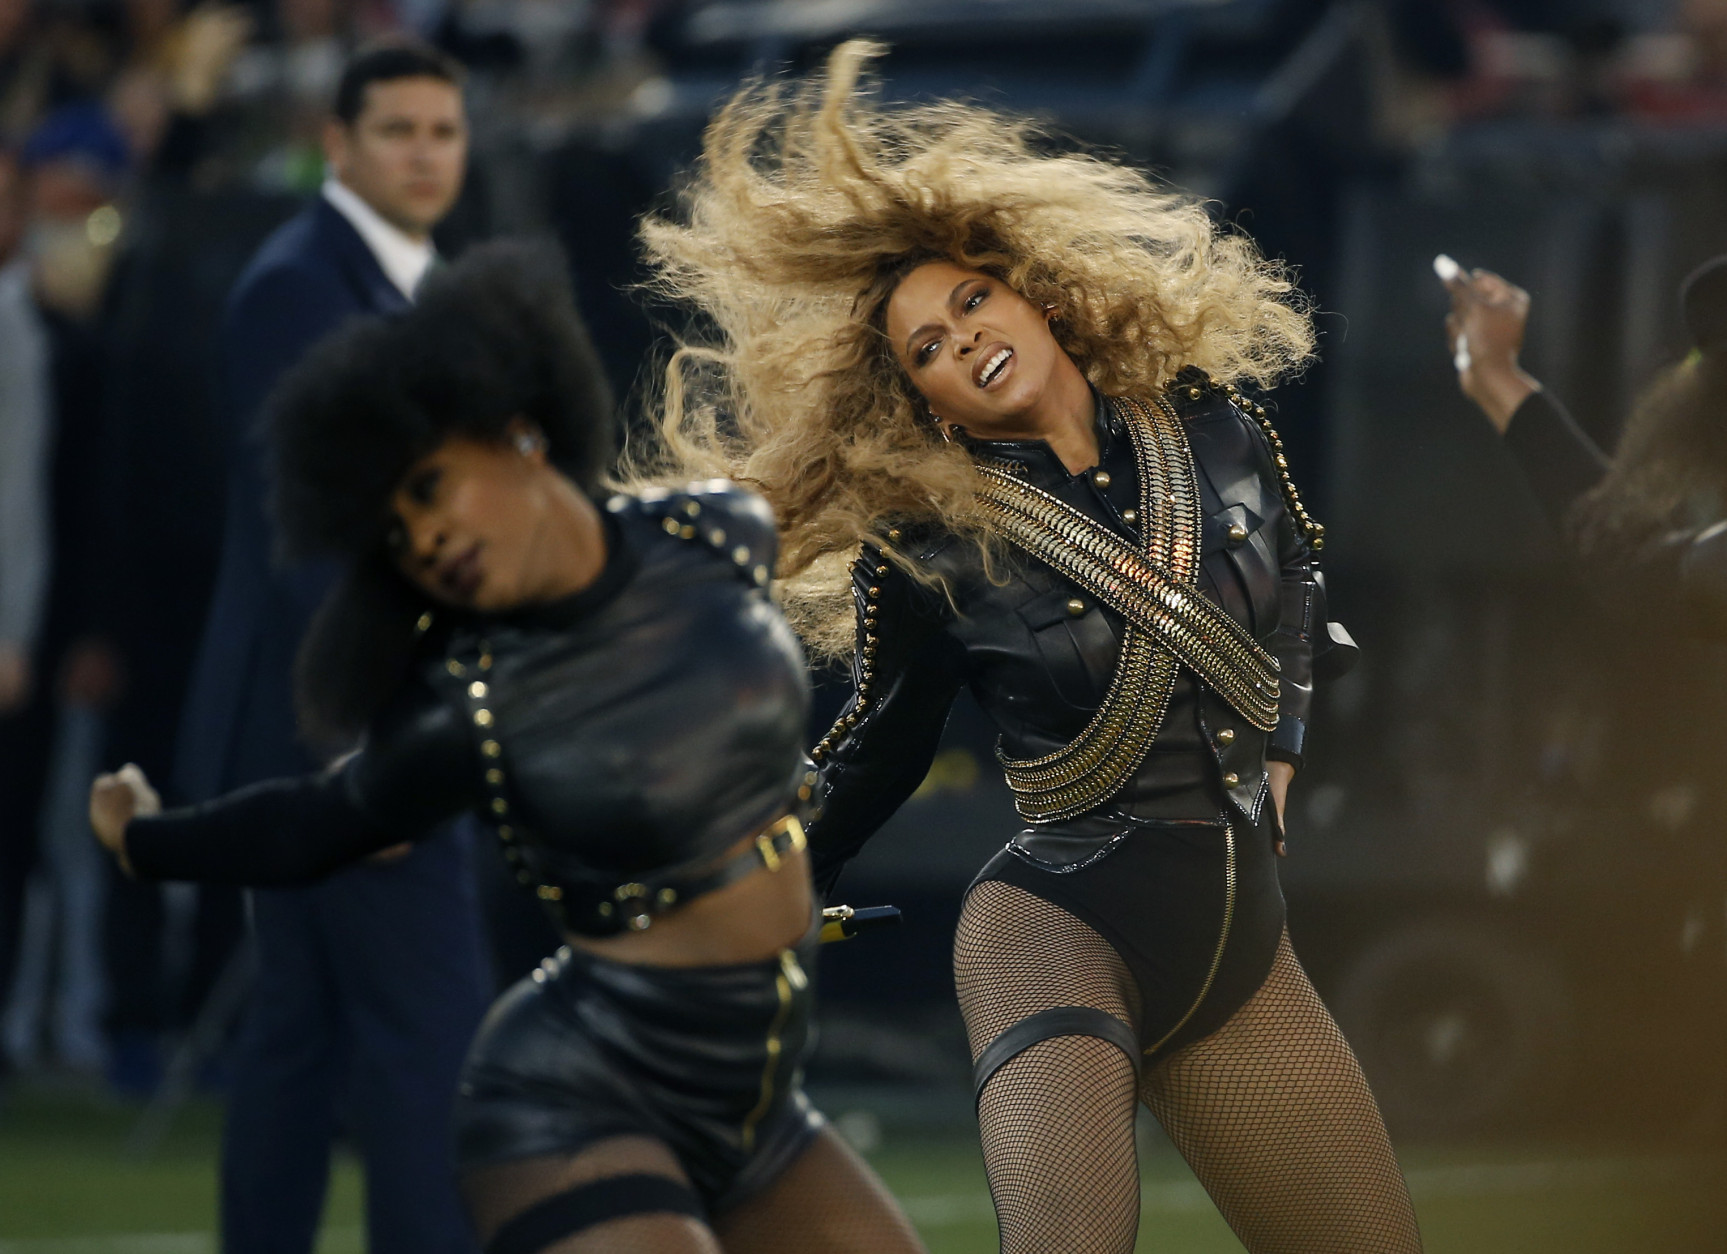 FILE - In this Sunday, Feb. 7, 2016 file photo, Beyonce performs during halftime of the NFL Super Bowl 50 football game in Santa Clara, Calif. Beyonce is working overtime this weekend: After releasing a new song Saturday and performing at the Super Bowl on Sunday, she's announced a new stadium tour. The Grammy-winning singer announced her 2016 Formation World Tour in a commercial after she performed at the halftime show with Bruno Mars and Coldplay. (AP Photo/Matt Slocum, File)